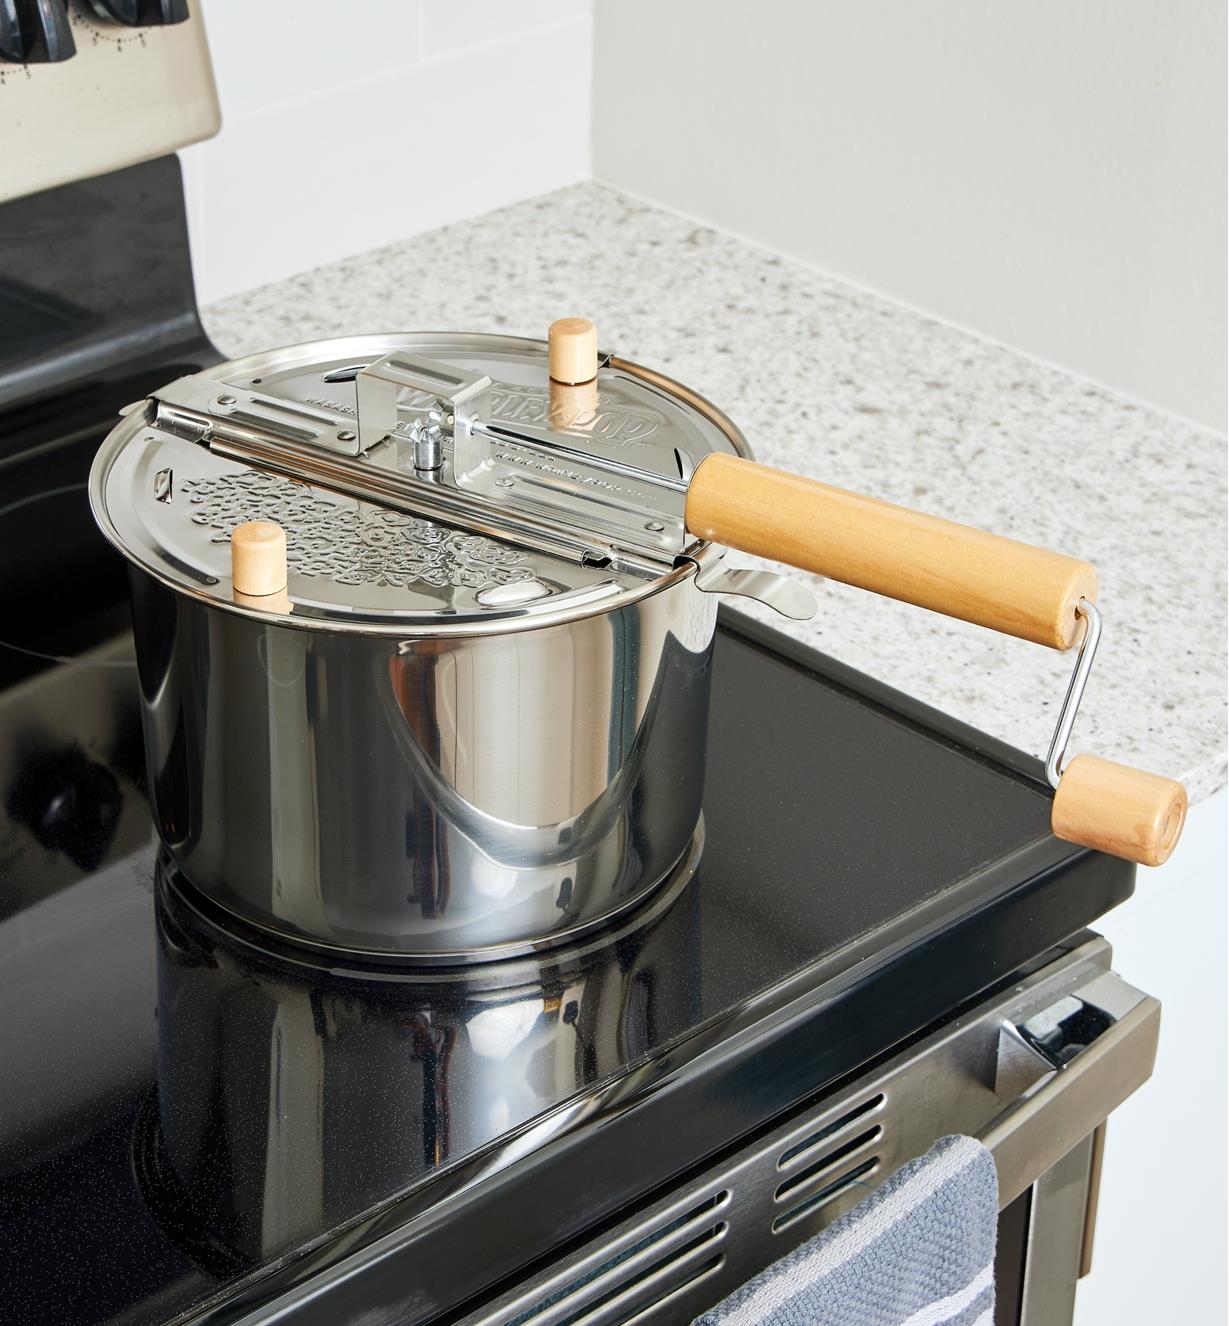 The stainless-steel Whirley-Pop popcorn popper sits on an induction stove top